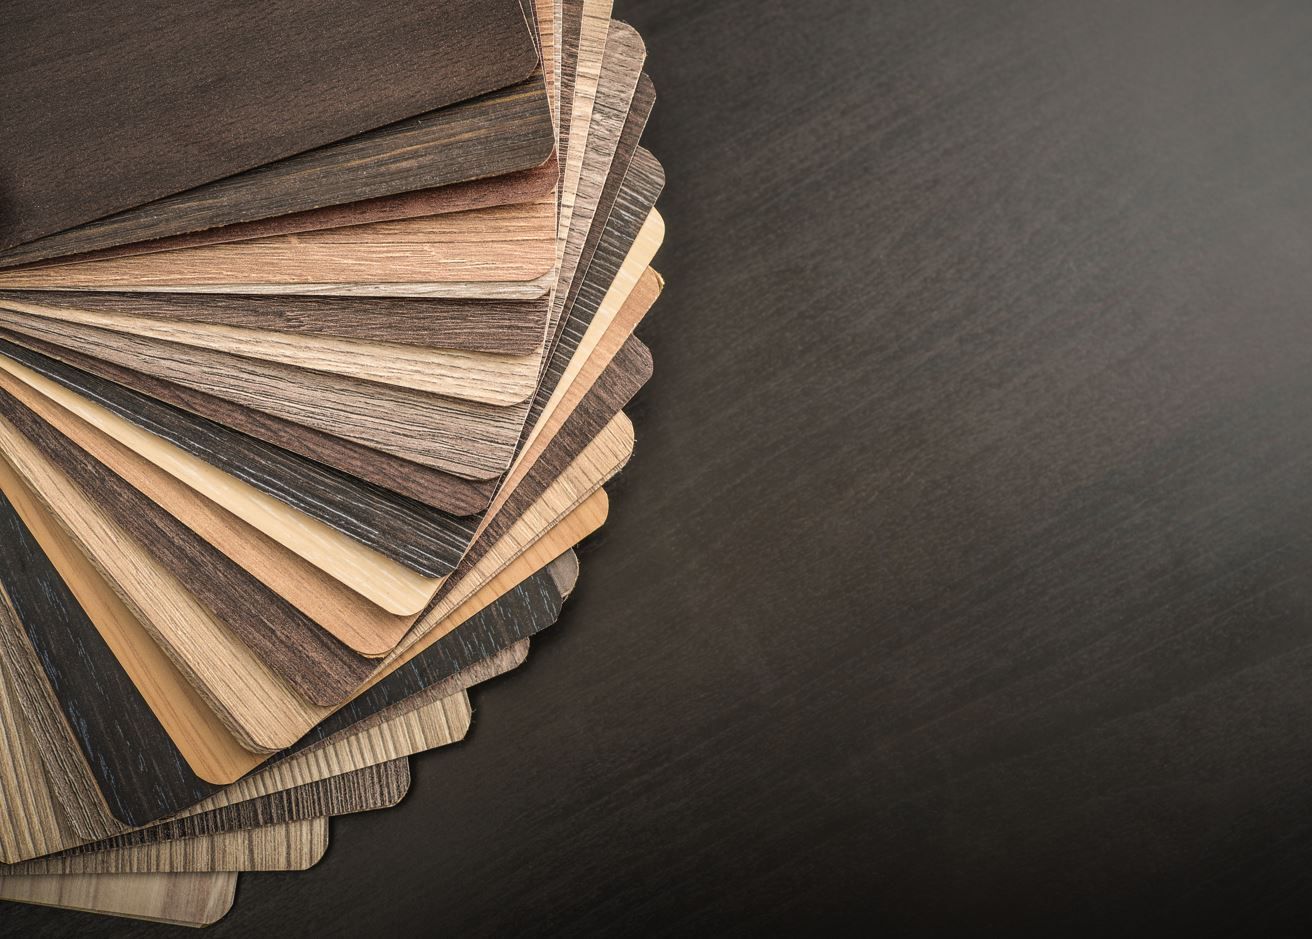 A stack of different types of veneered plywood panel samples on a black table.